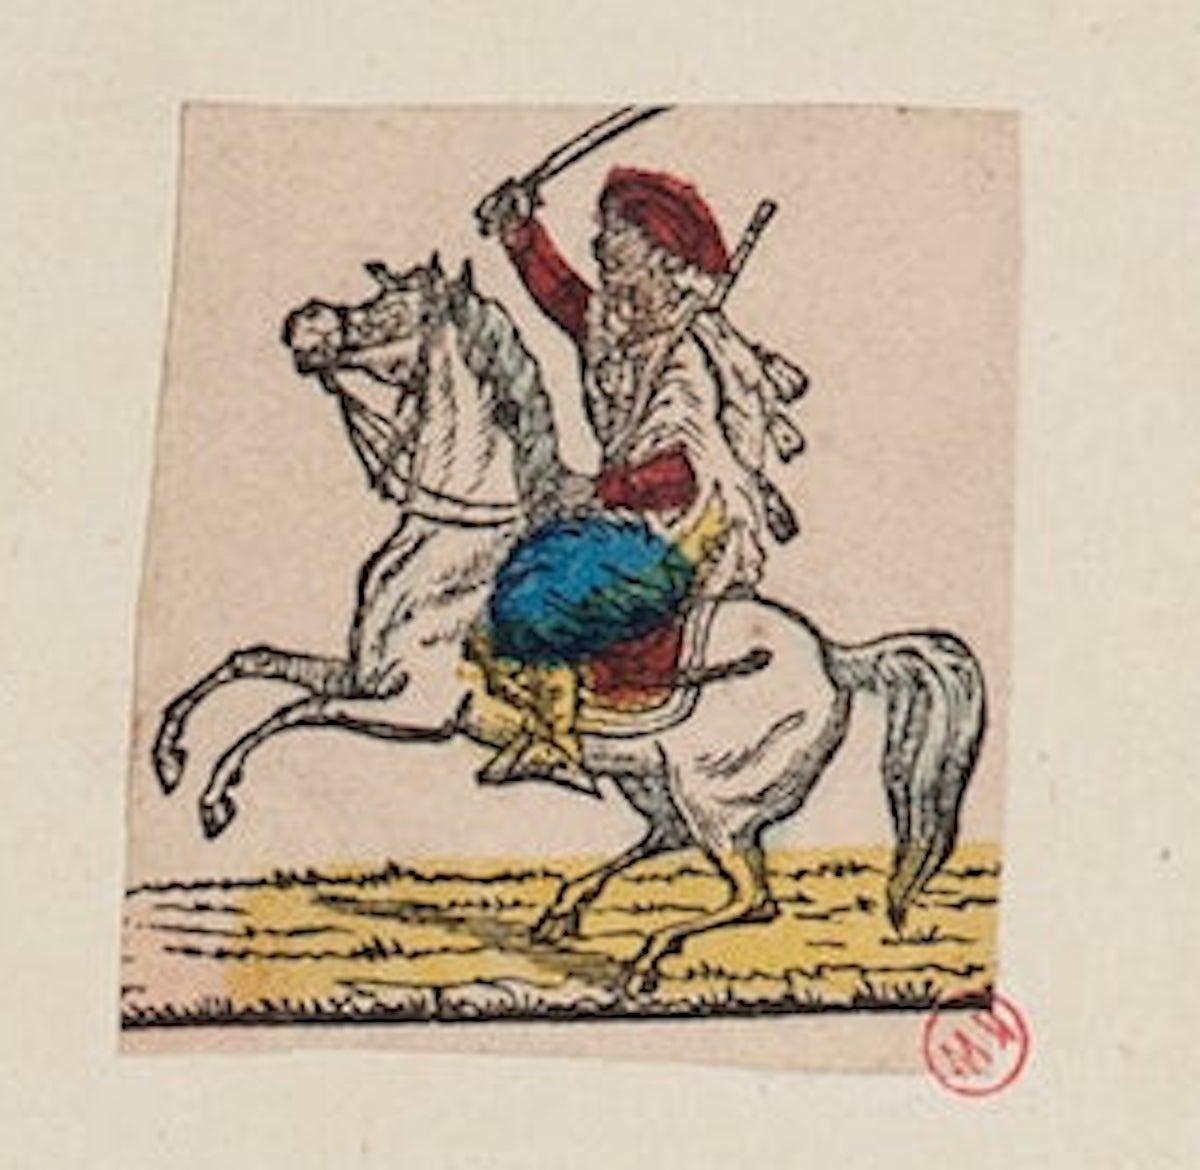 Unknown Figurative Print - Arab Knight  - Original Hand-color Etching on Paper - 18th Century